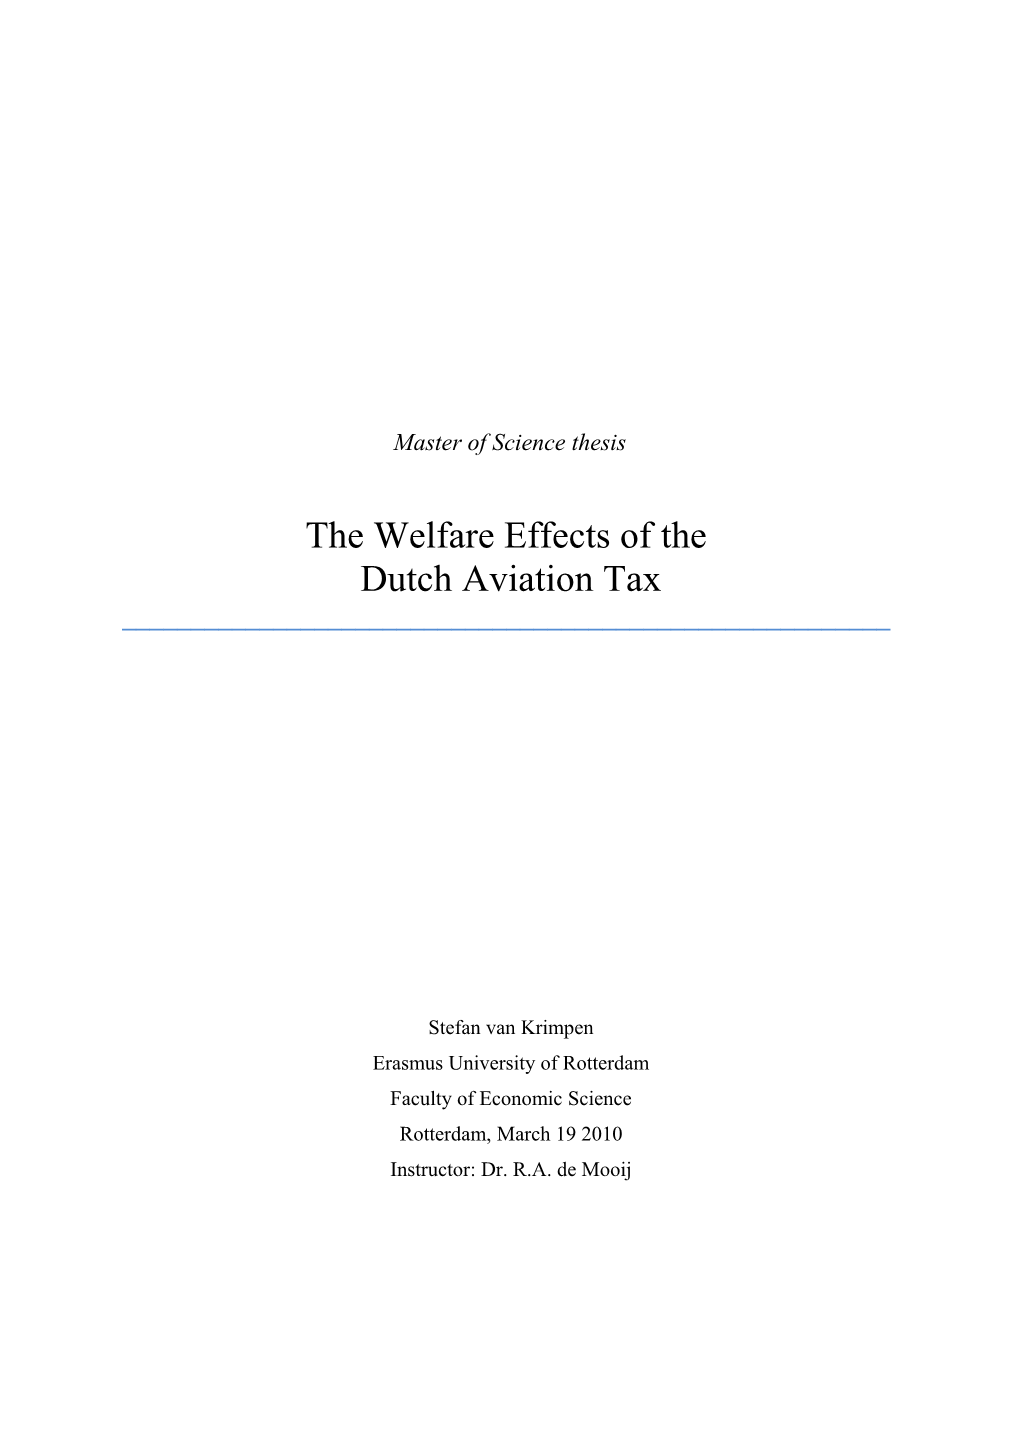 The Welfare Effects of The